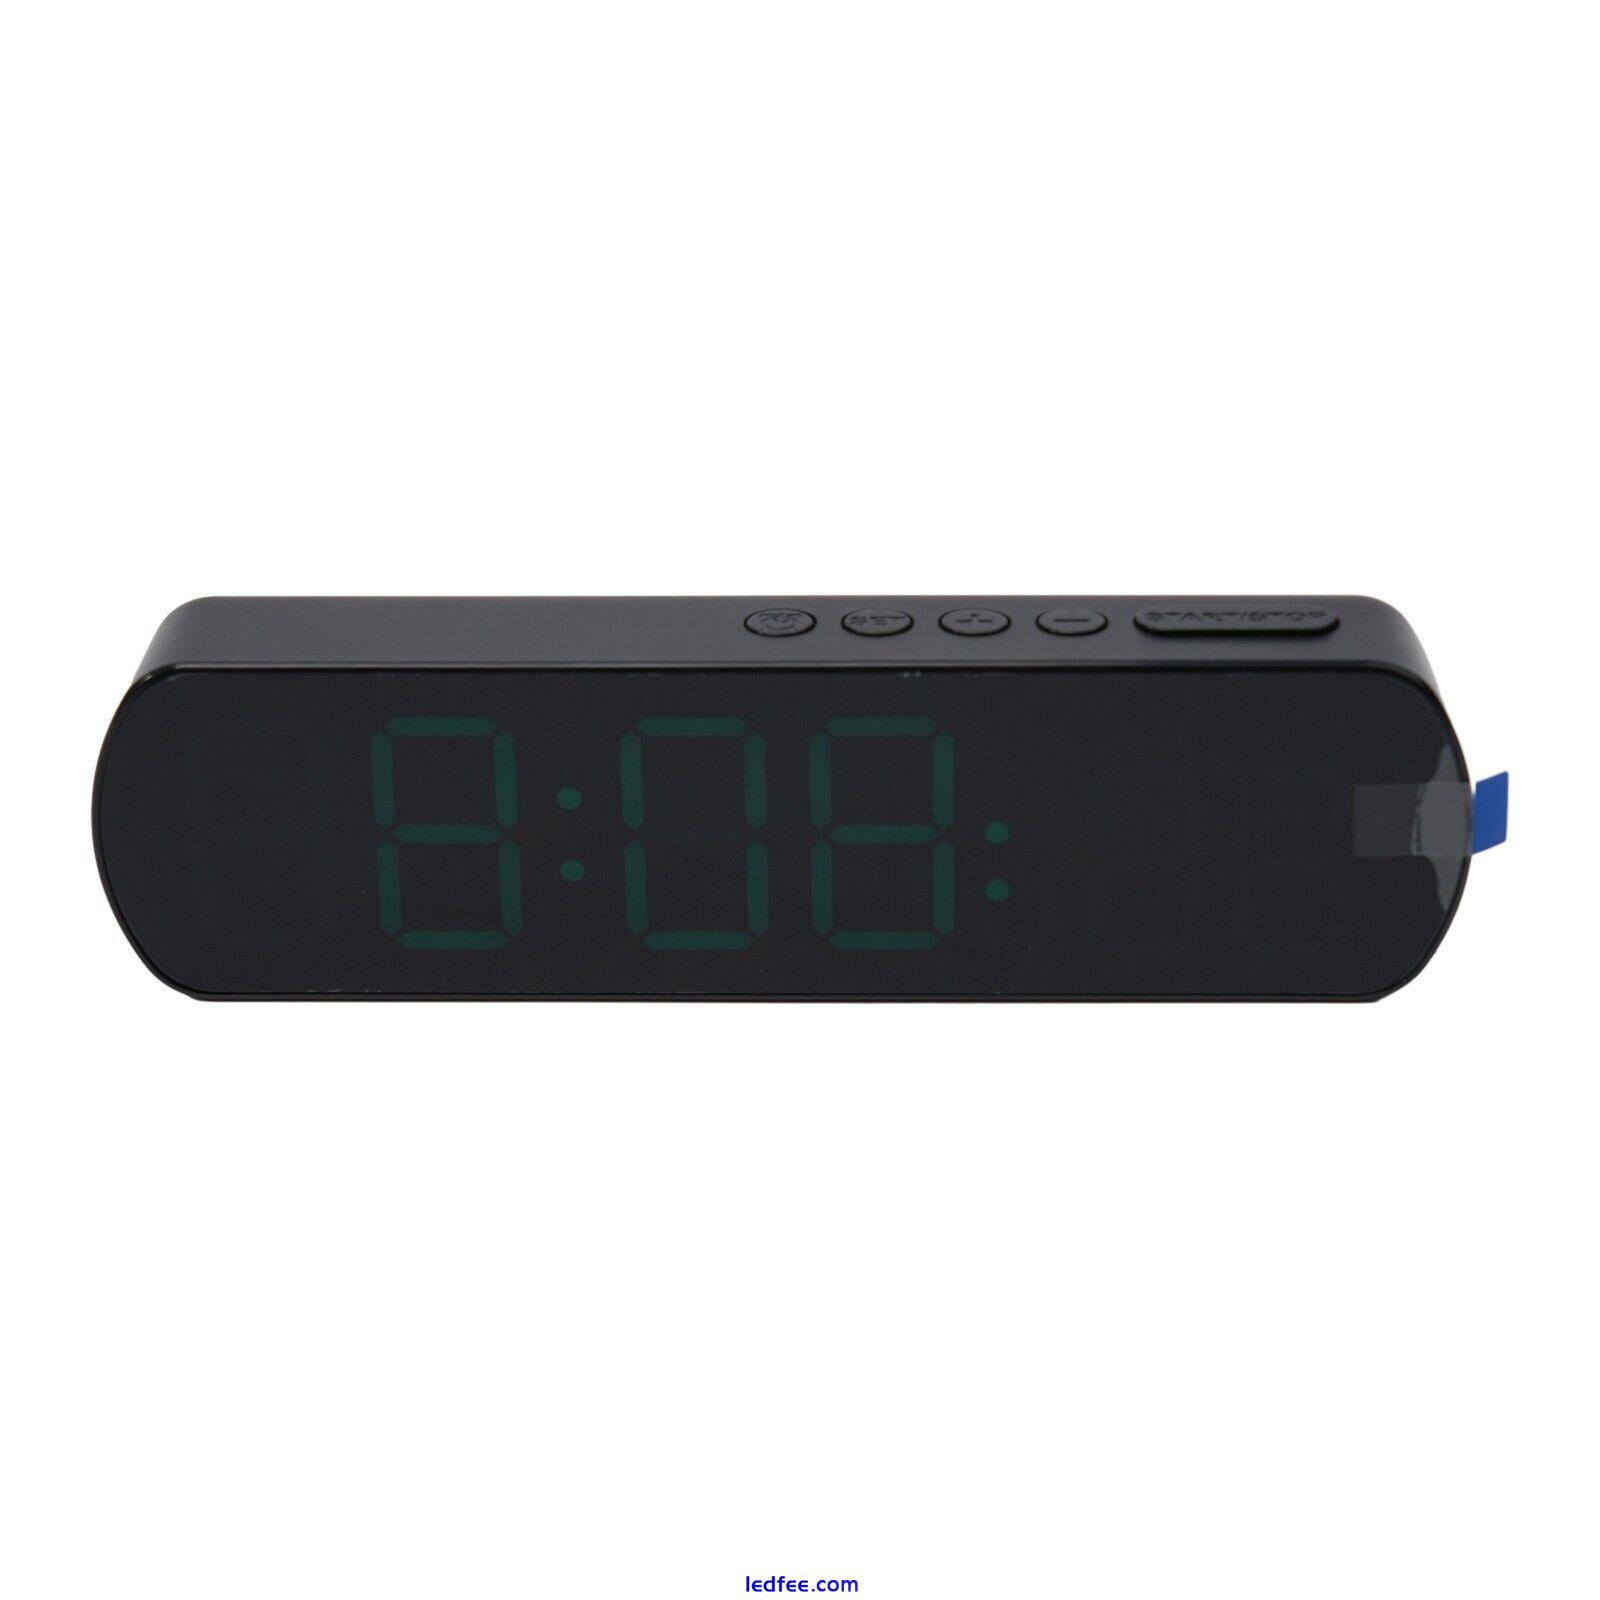 Desktop LED Alarm Clock with Temperature/Humidity Display & Timer Feature 2 